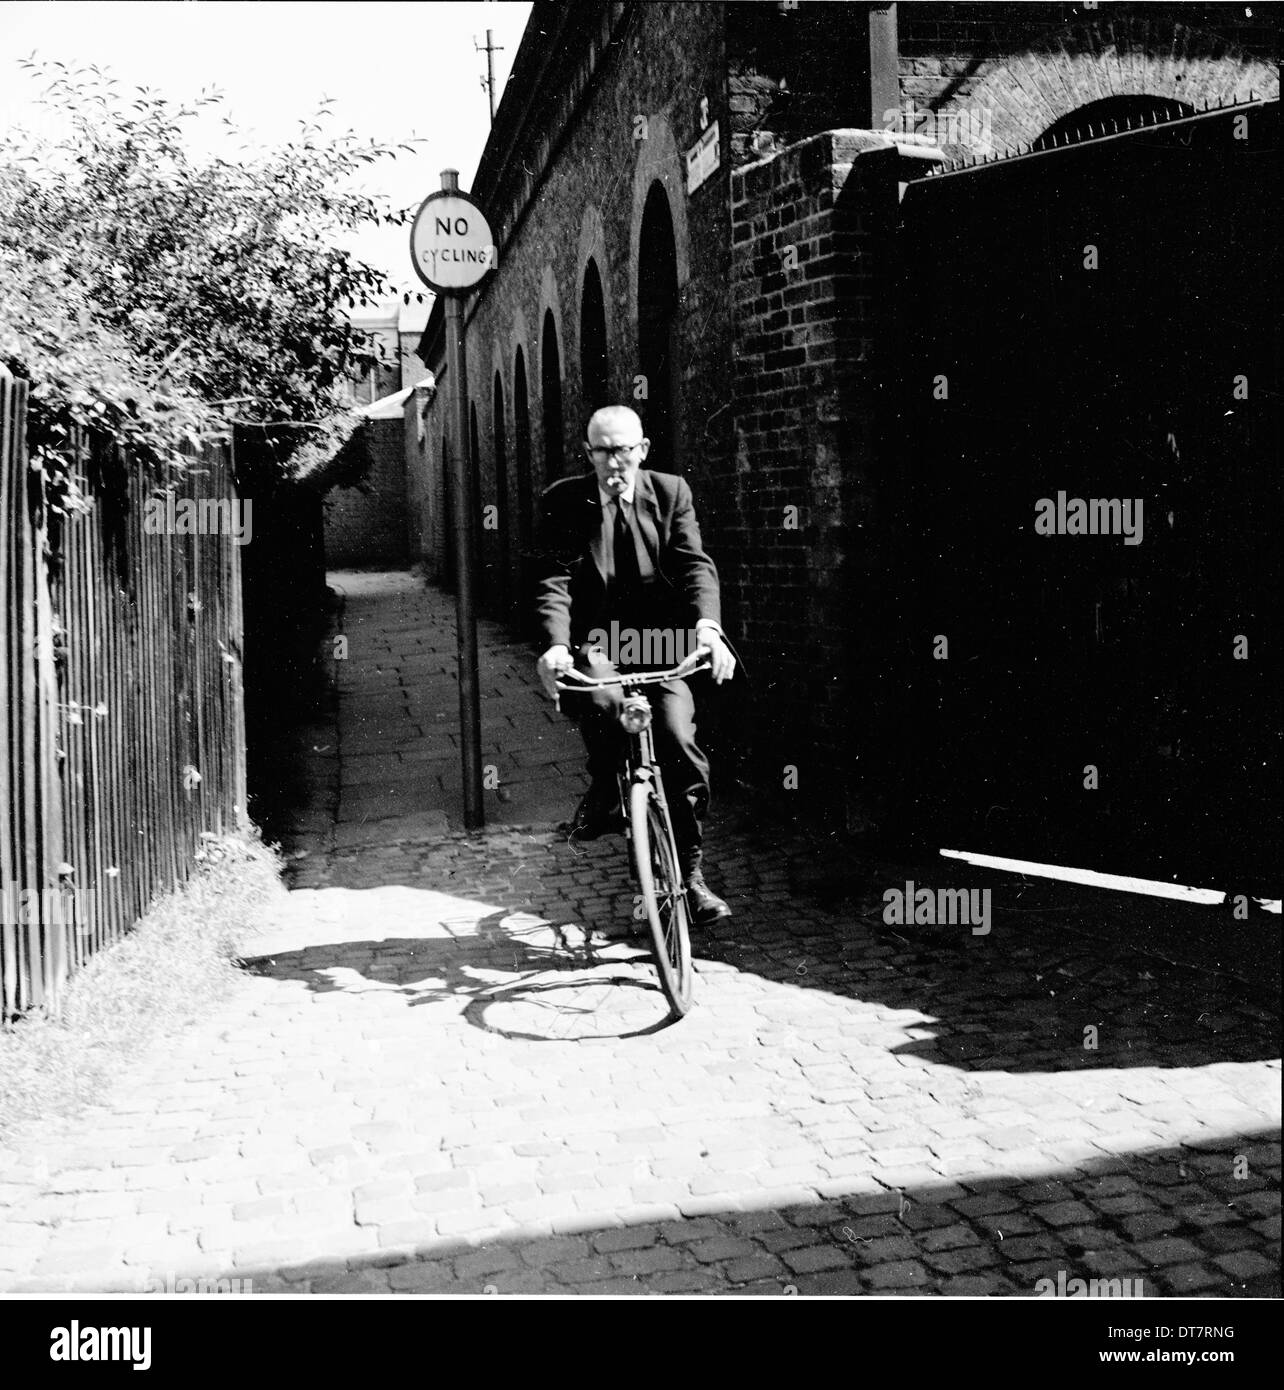 1950s, elderly gentleman in suit on a bicycle coming down a narrow alleyway with sign saying no cycling. Stock Photo